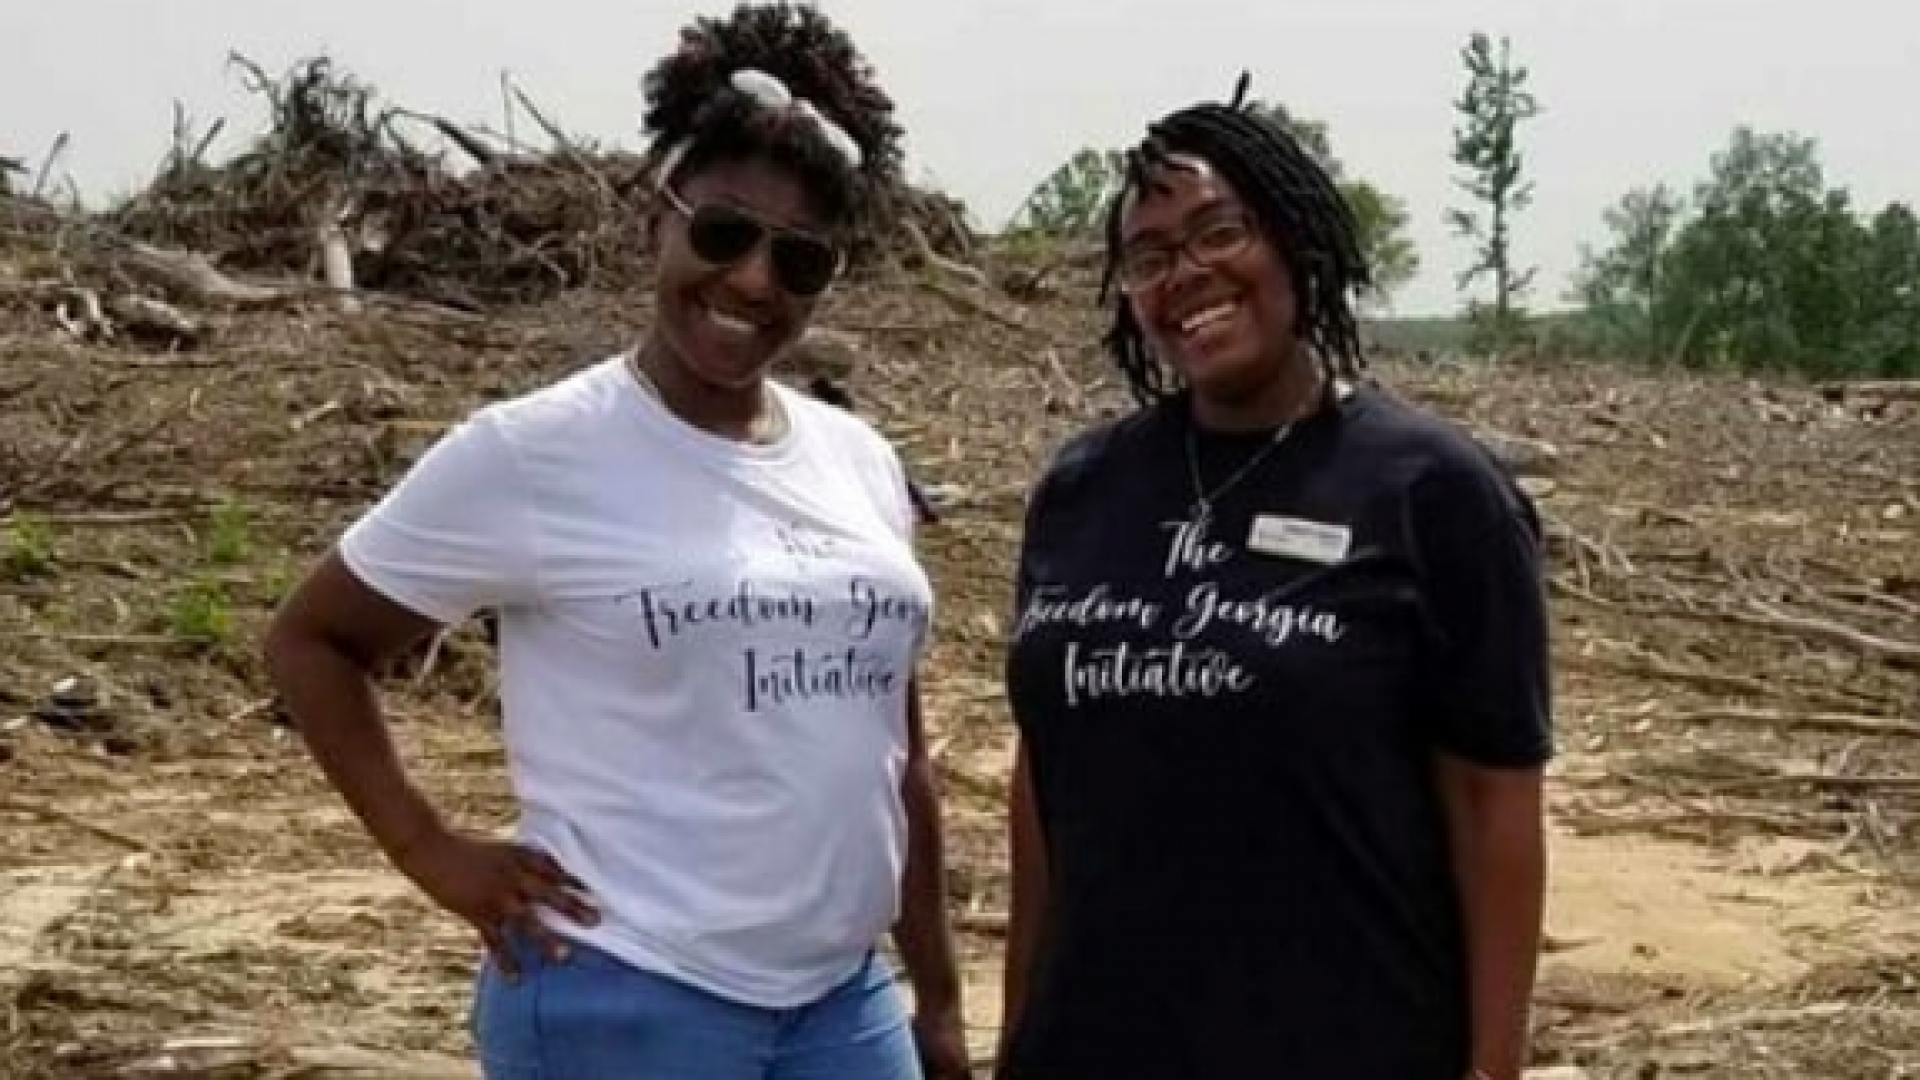 Collective of Georgia Women Purchase 97 Acres Of Land to Create Safe City for Black Families